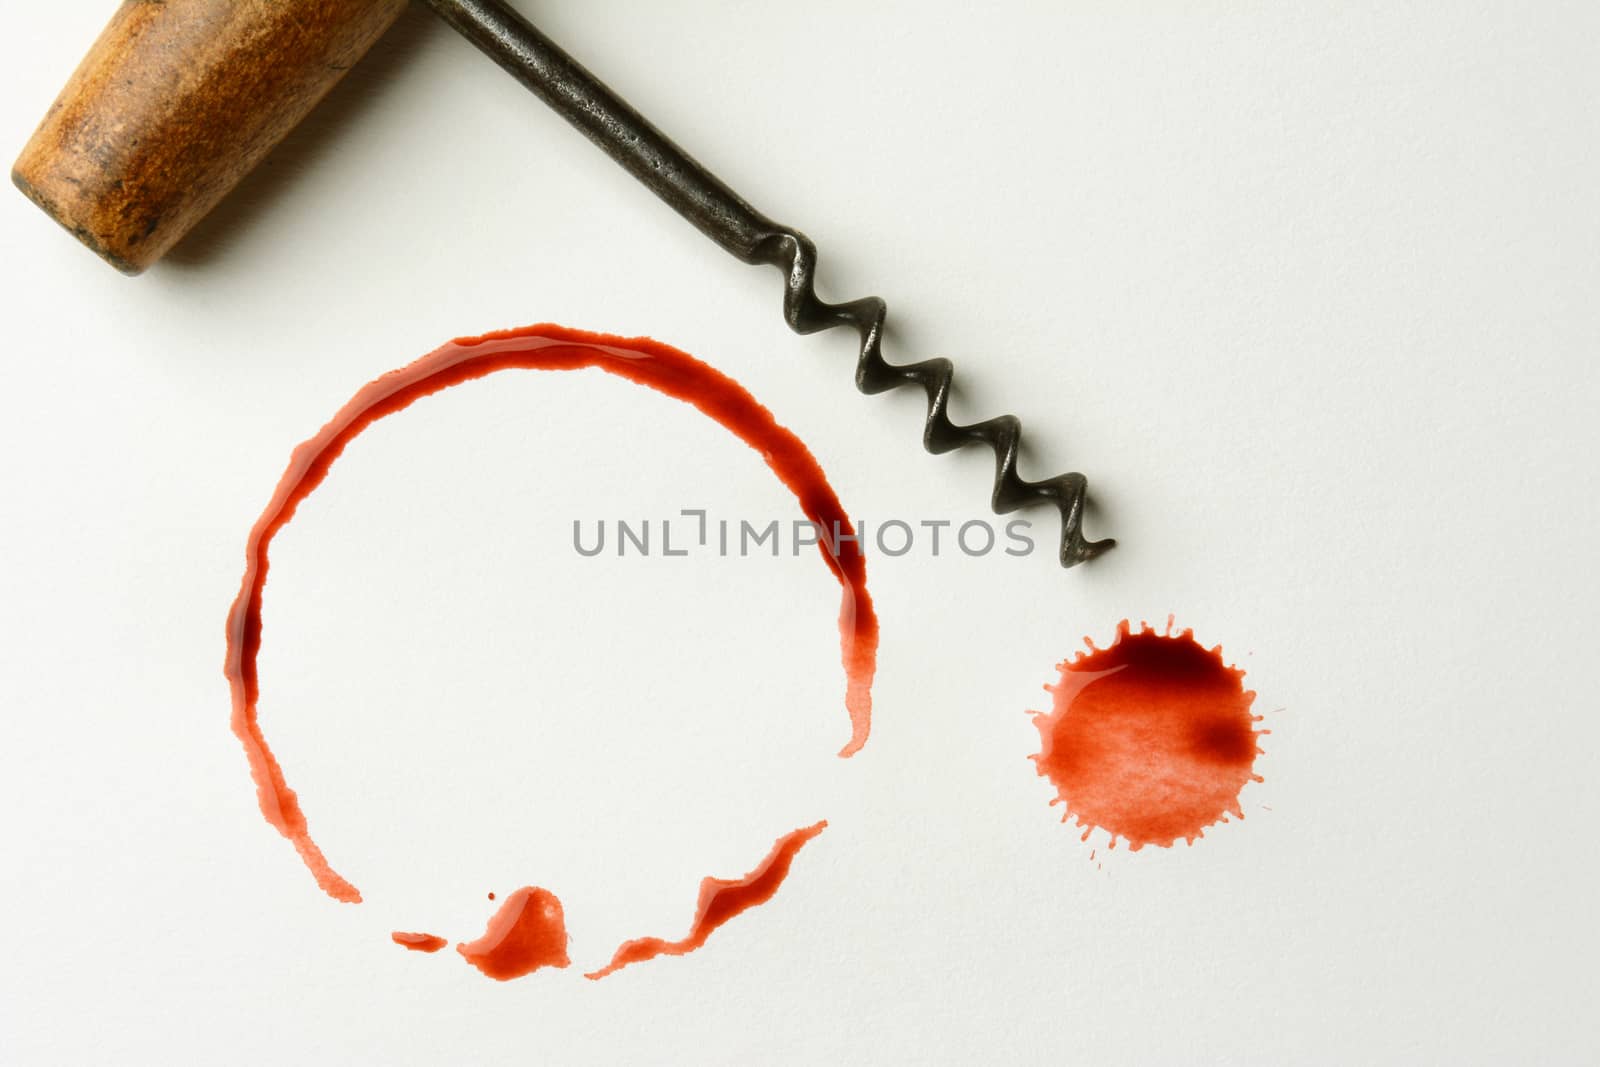 Wine Stain and Antique Corkscrew by sCukrov